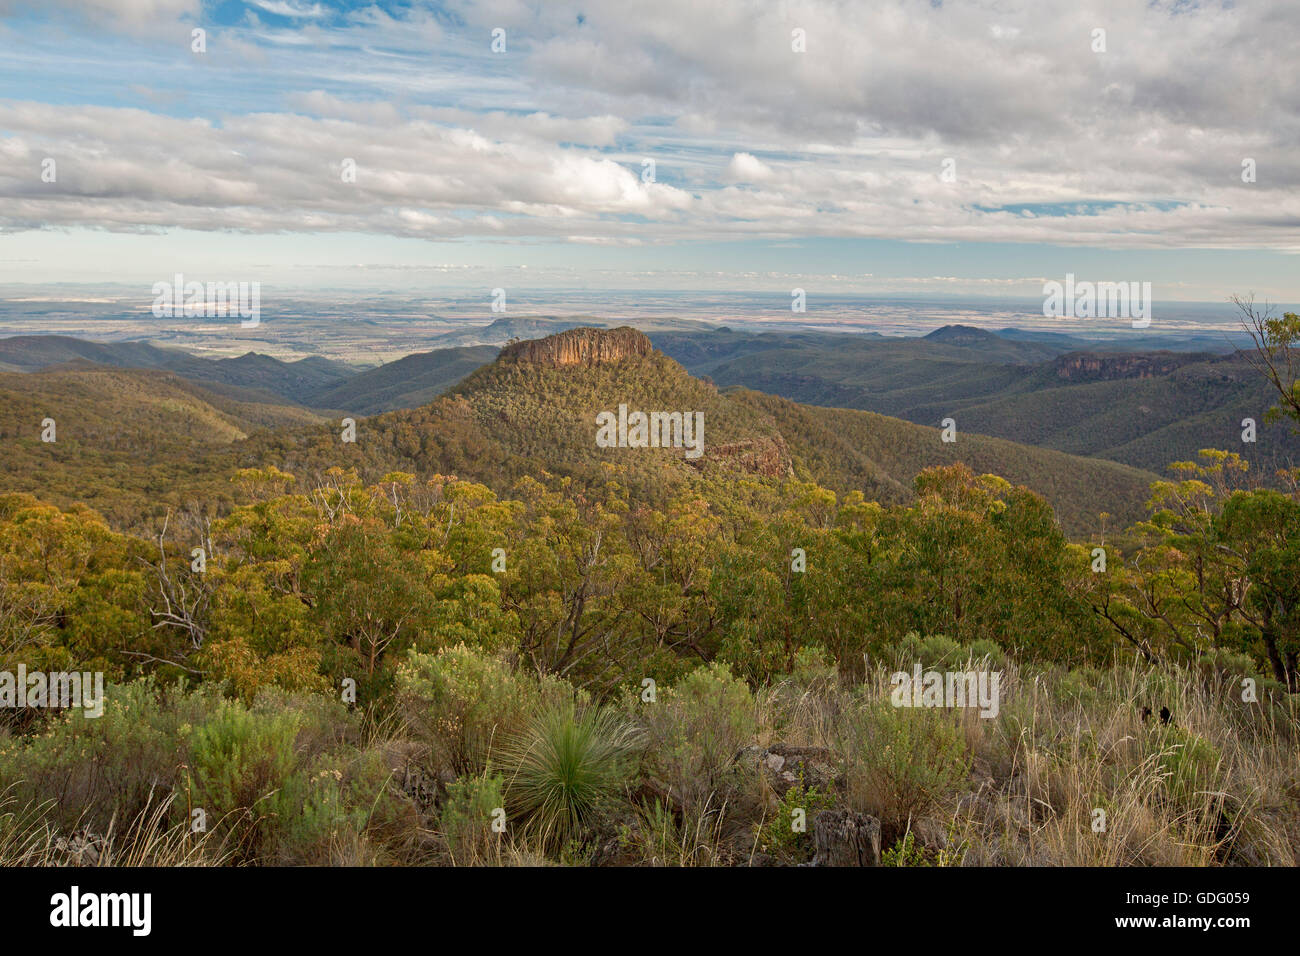 Stunning view from high lookout of vast landscape of forested ranges and jagged peaks at Mount Kaputar National Park, Australia Stock Photo